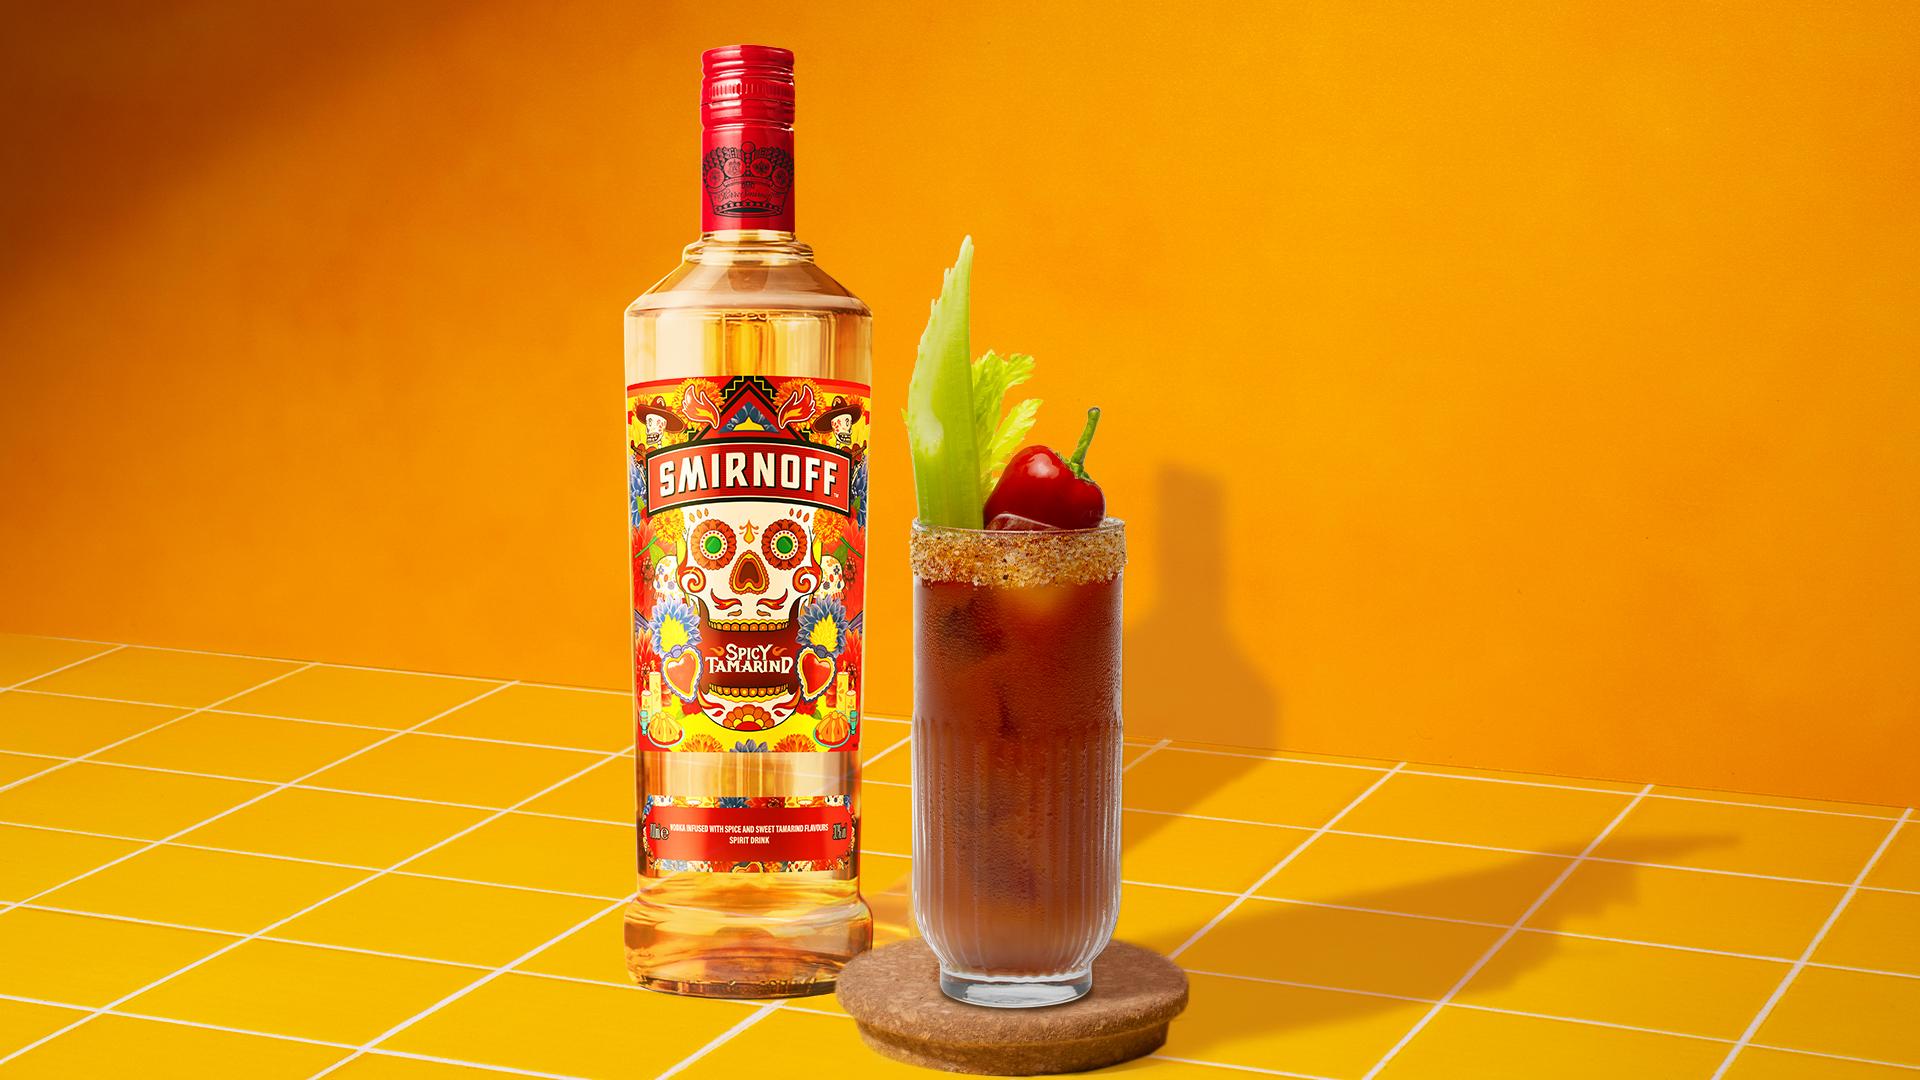 Smirnoff Spicy Tamarind vodka bottle beside a Bloody Mary cocktail with a chili powder rim, garnished with a celery stalk and a red chili pepper, set against a vibrant yellow background with white grid lines.